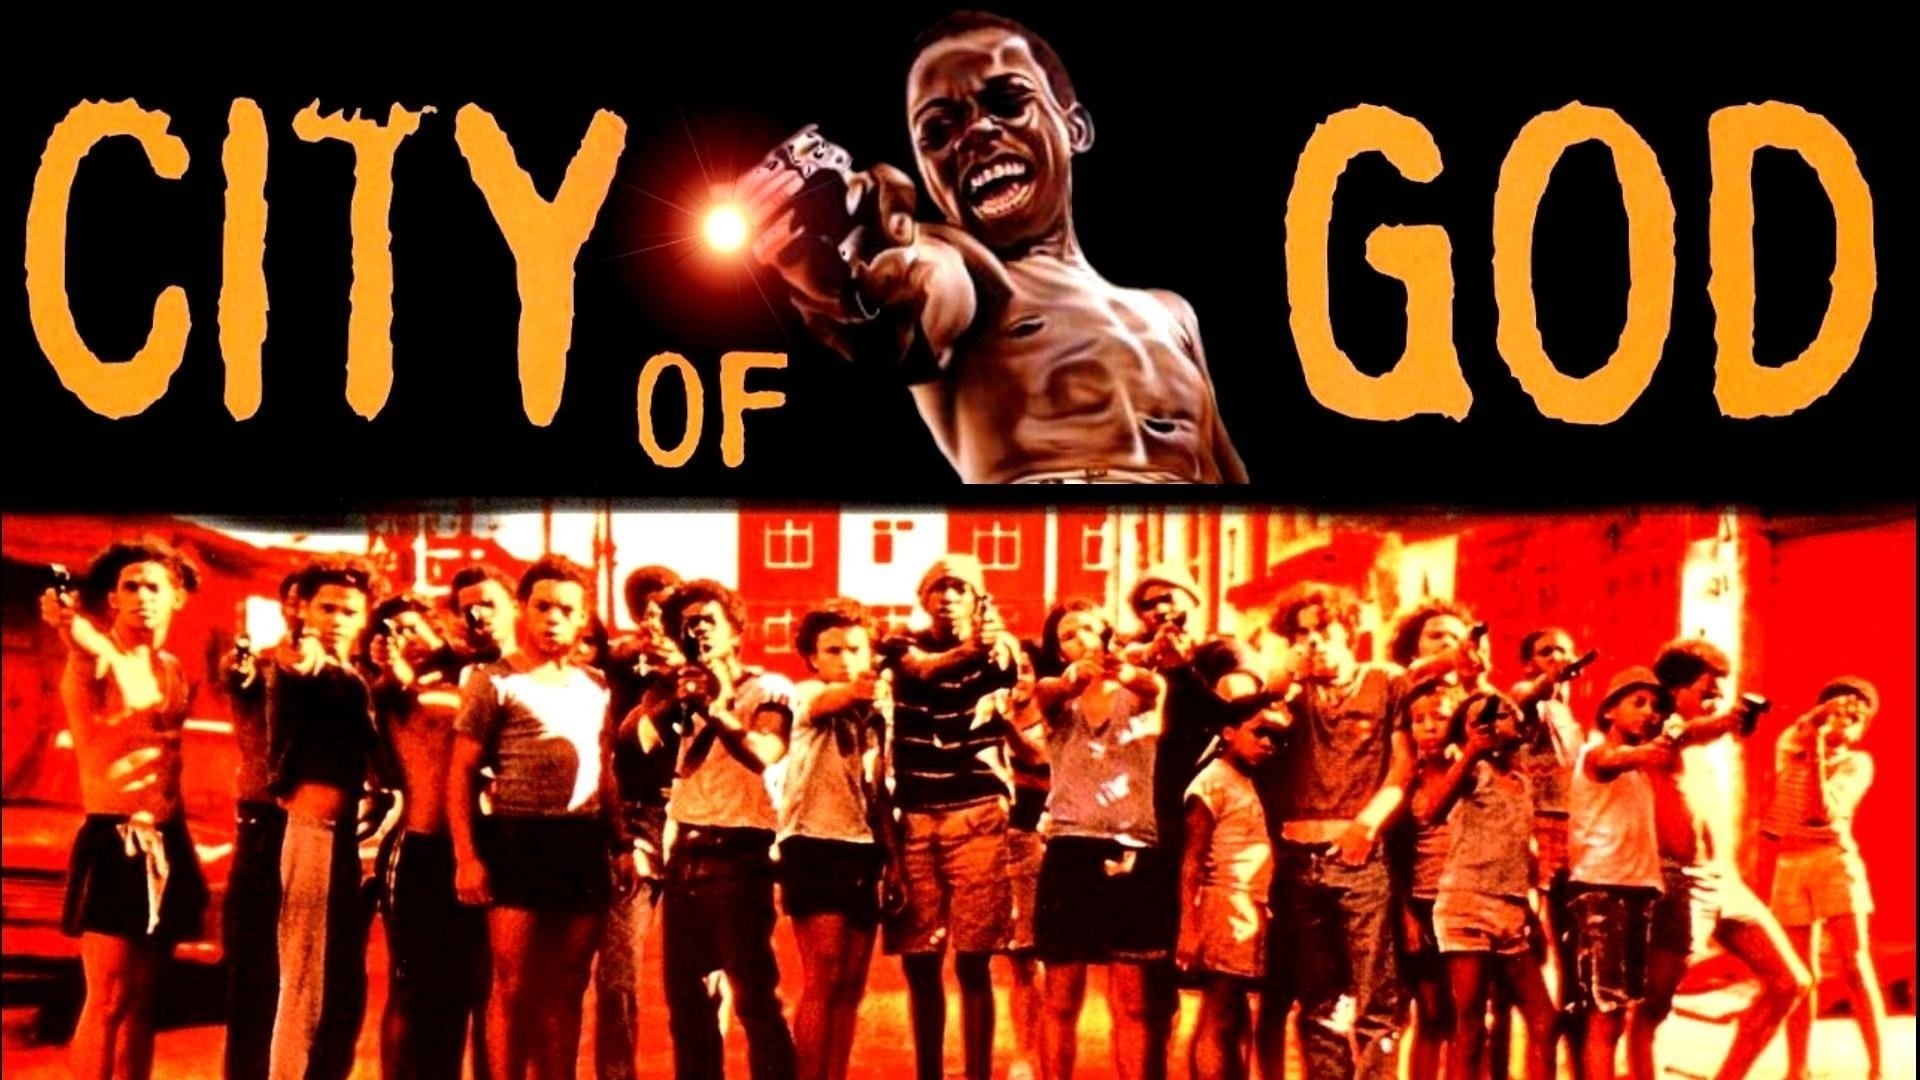 City Of God Wallpapers City Of God Hd 1061 Hd Wallpaper Backgrounds Download